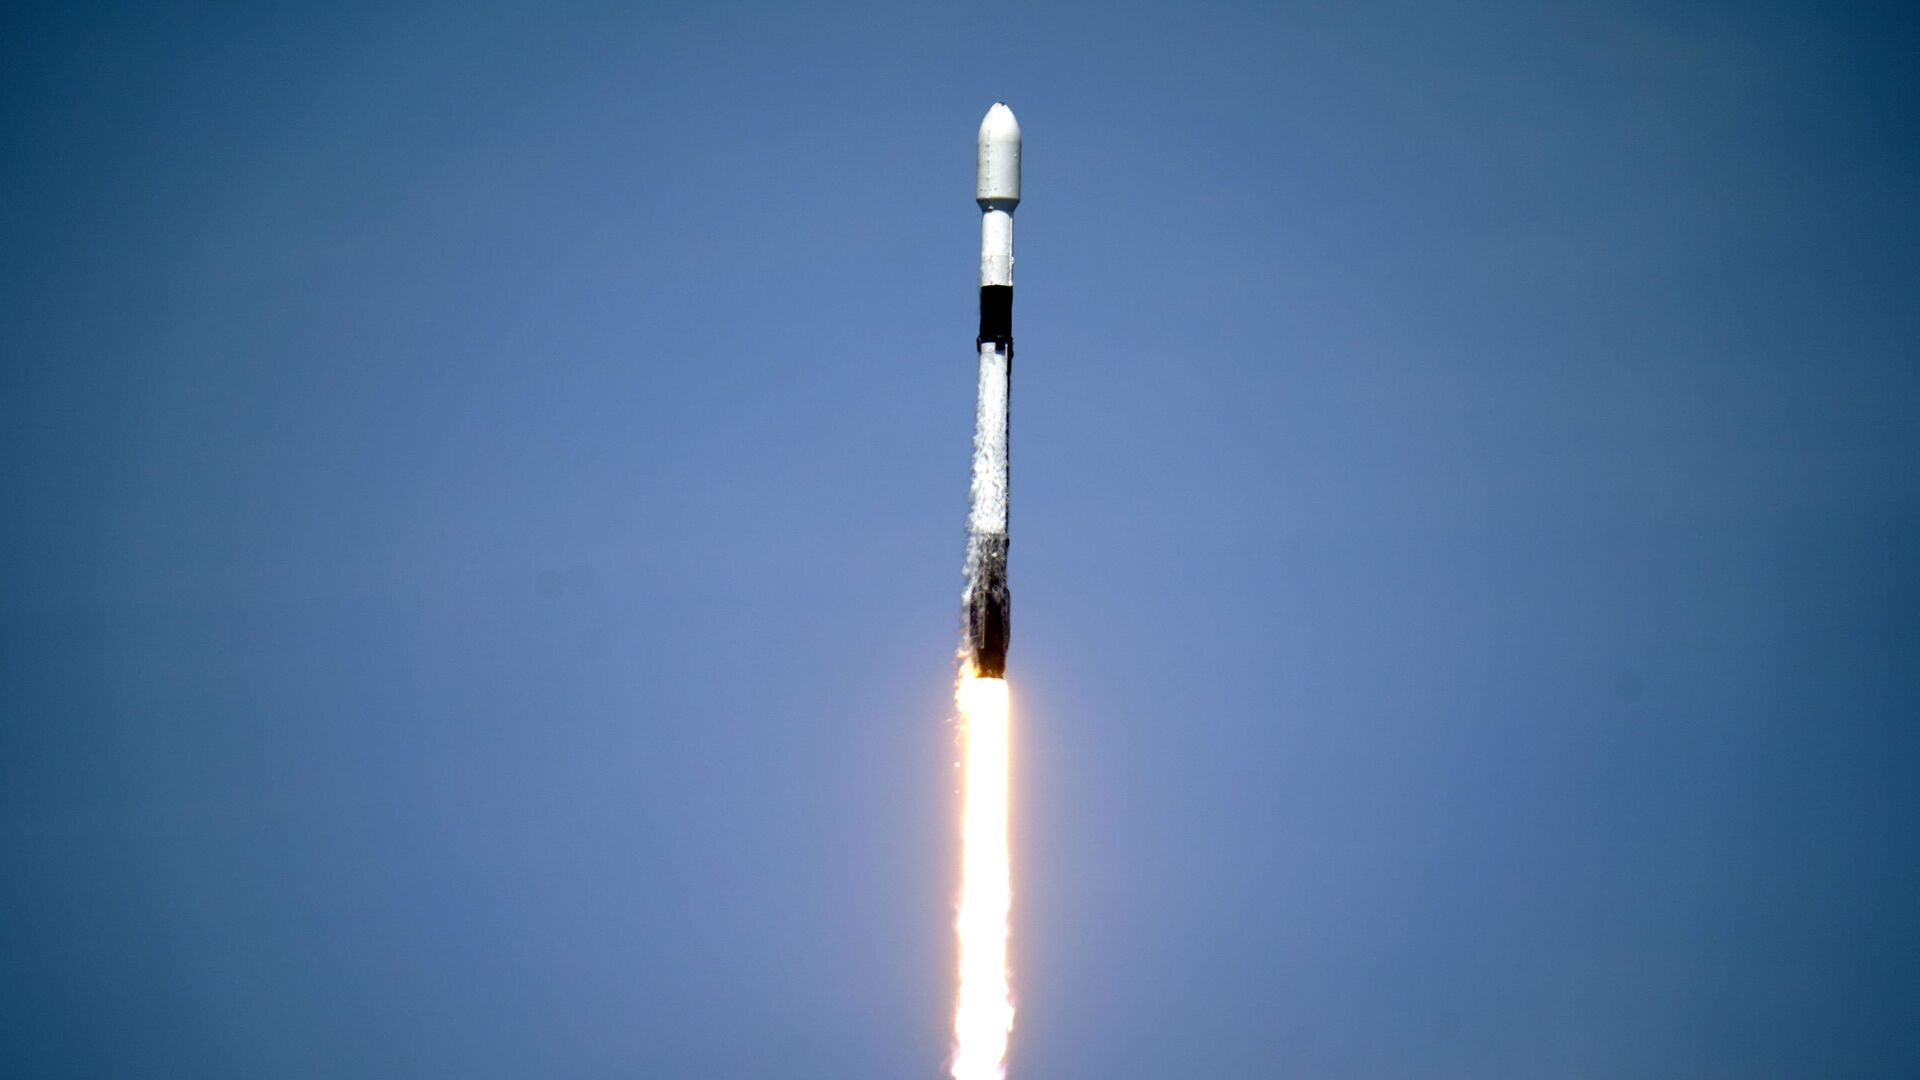 A SpaceX Falcon 9 rocket with the 26th batch of approximately 60 satellites for SpaceX's Starlink broadband network lifts off from pad 39A at the Kennedy Space Center in Cape Canaveral, Fla., Tuesday, May 4, 2021.  - Sputnik International, 1920, 14.09.2021